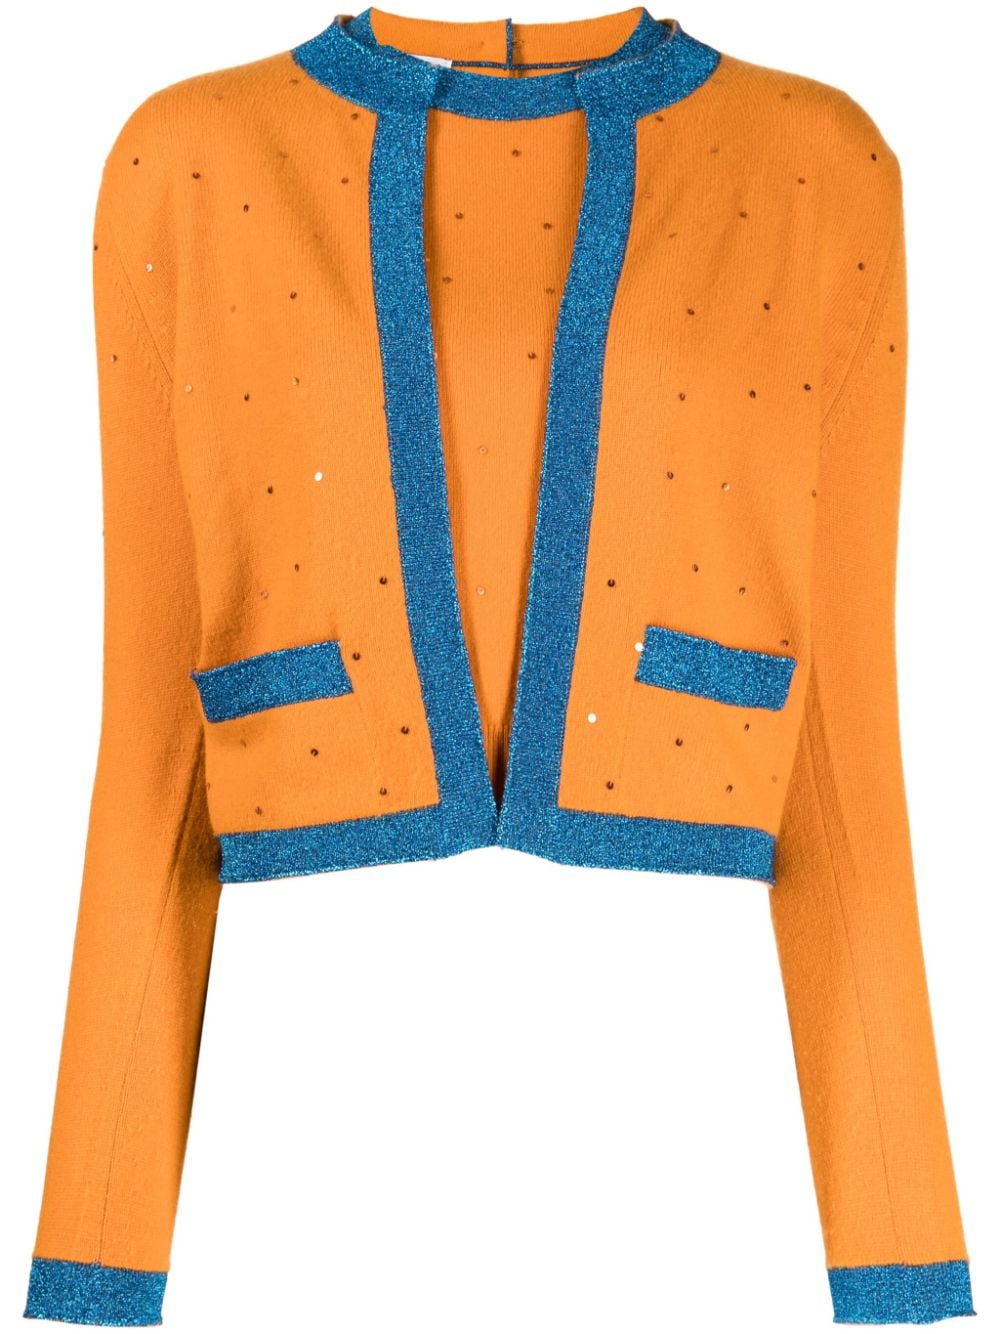 CHANEL Pre-Owned 1996 sequinned knitted top and cardigan set - Orange